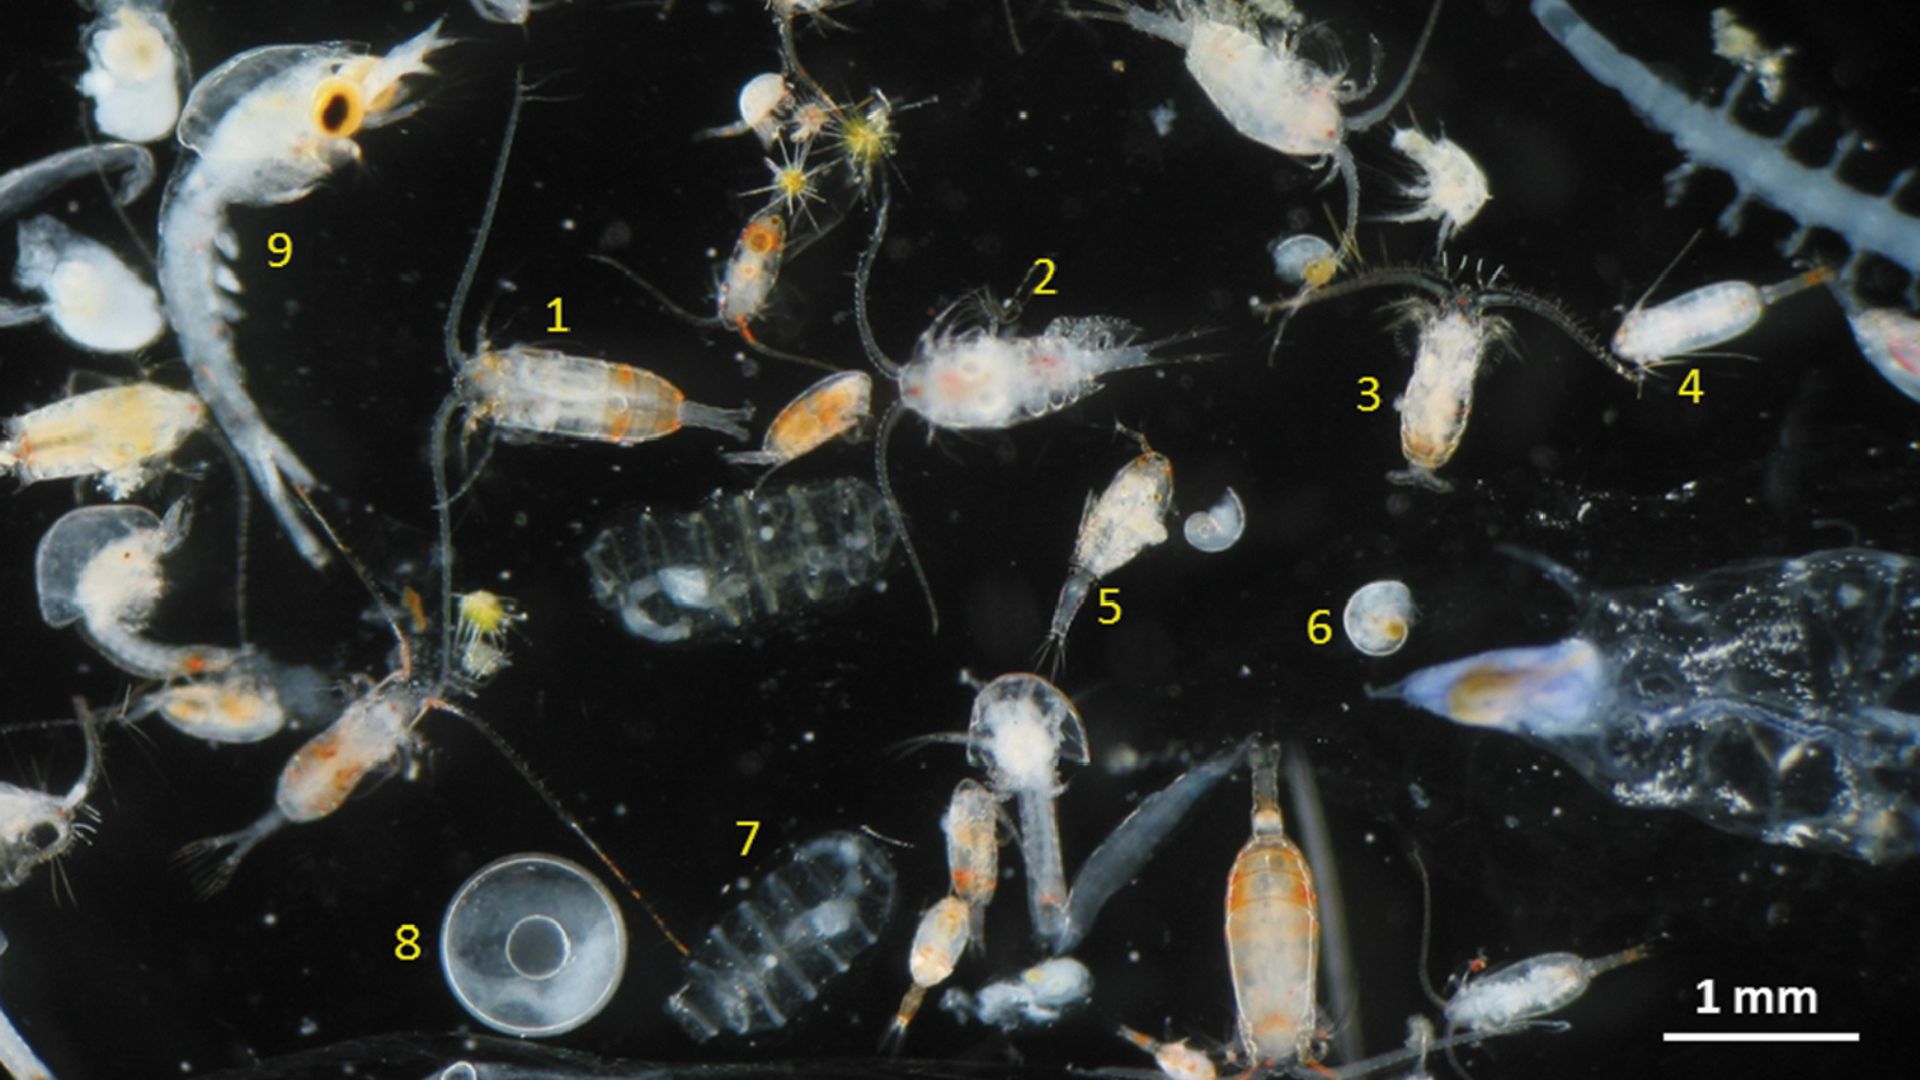 A photo taken with a microscope shows translucent crustaceans against a black background.